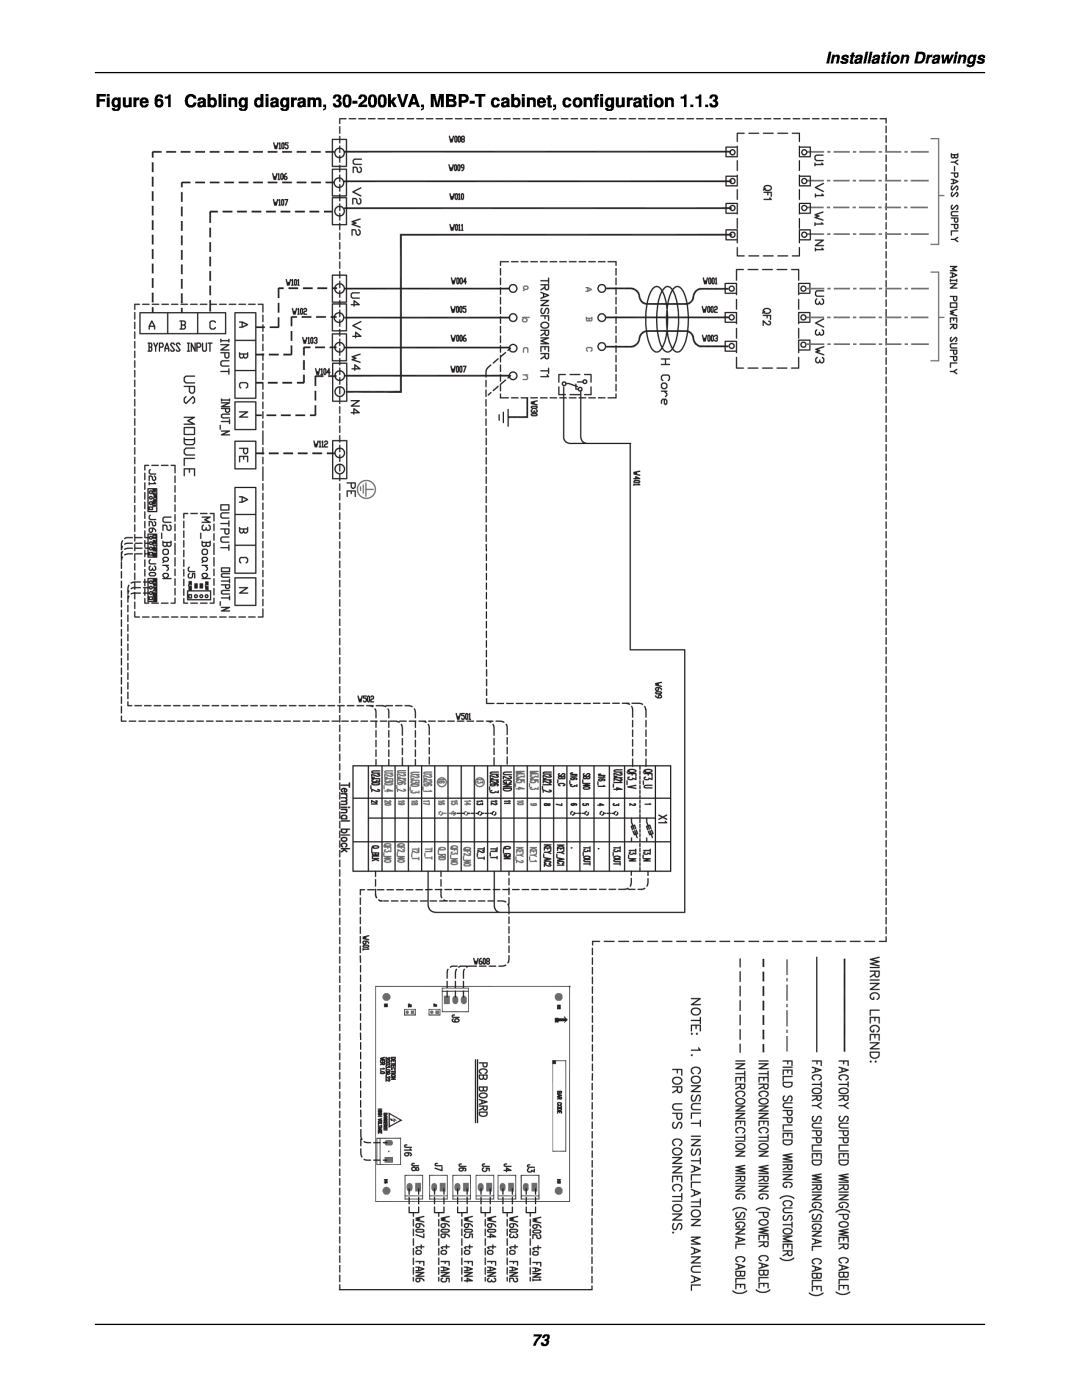 Emerson 400V, 50 and 60 Hz user manual Cabling diagram, 30-200kVA, MBP-T cabinet, configuration, Installation Drawings 